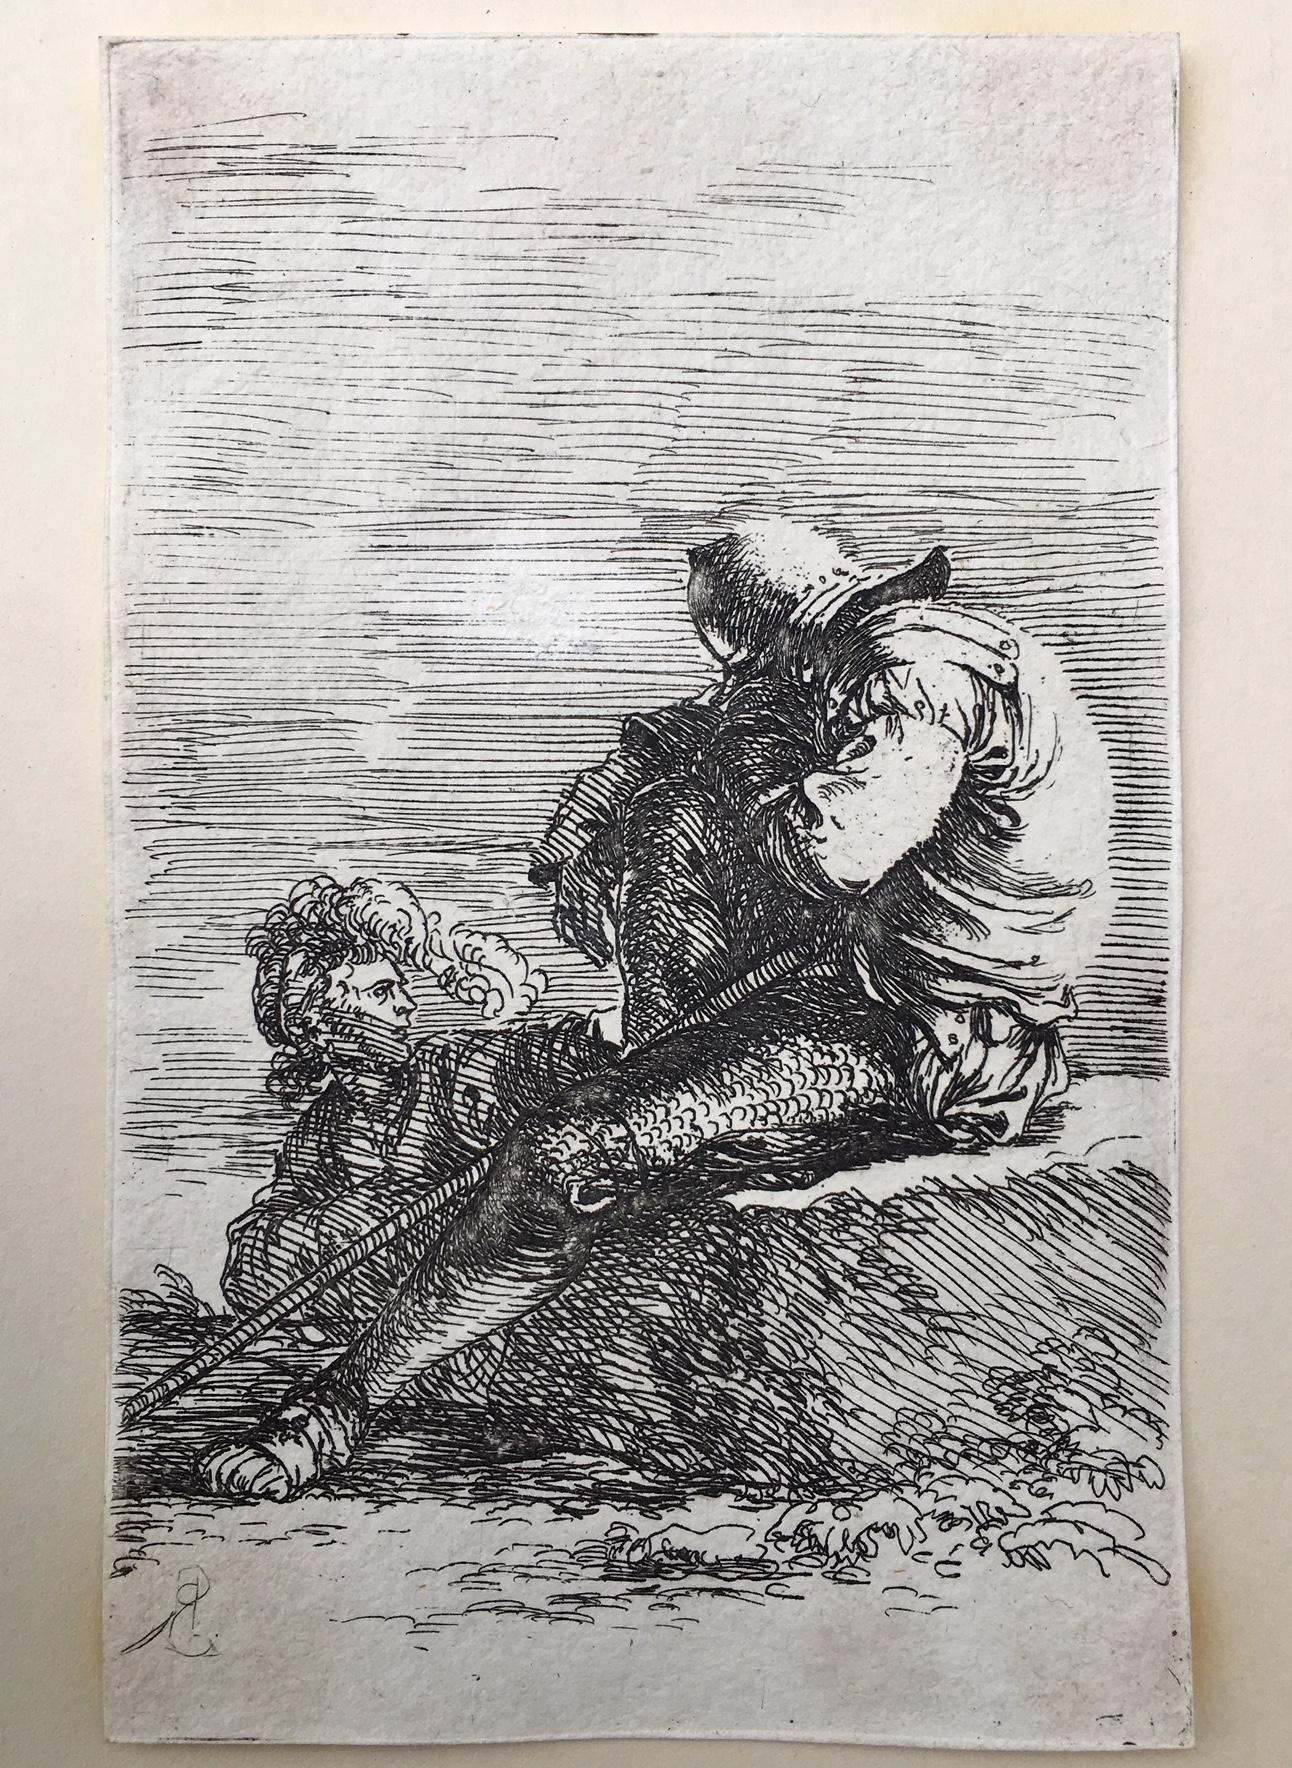 Salvator Rosa, the Italian Baroque painter was also a significant etcher and printmaker. Rosa’s is series of small prints of soldiers was very popular and influential. This etching is one of those prints. It is cut on the margin and monogrammed in